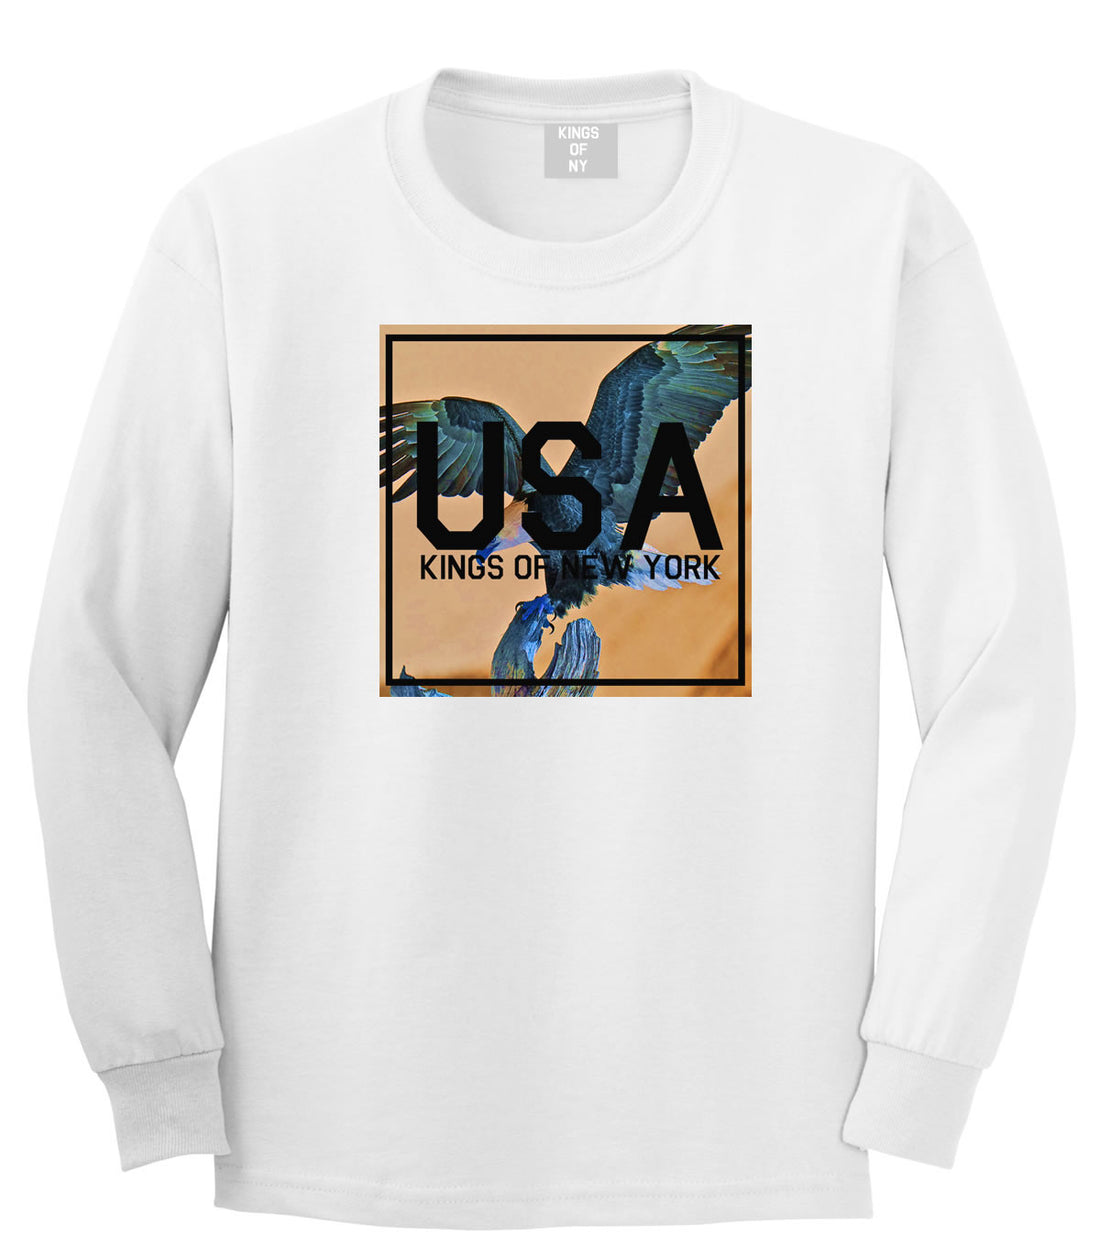 USA Bald Eagle America Long Sleeve T-Shirt in White By Kings Of NY